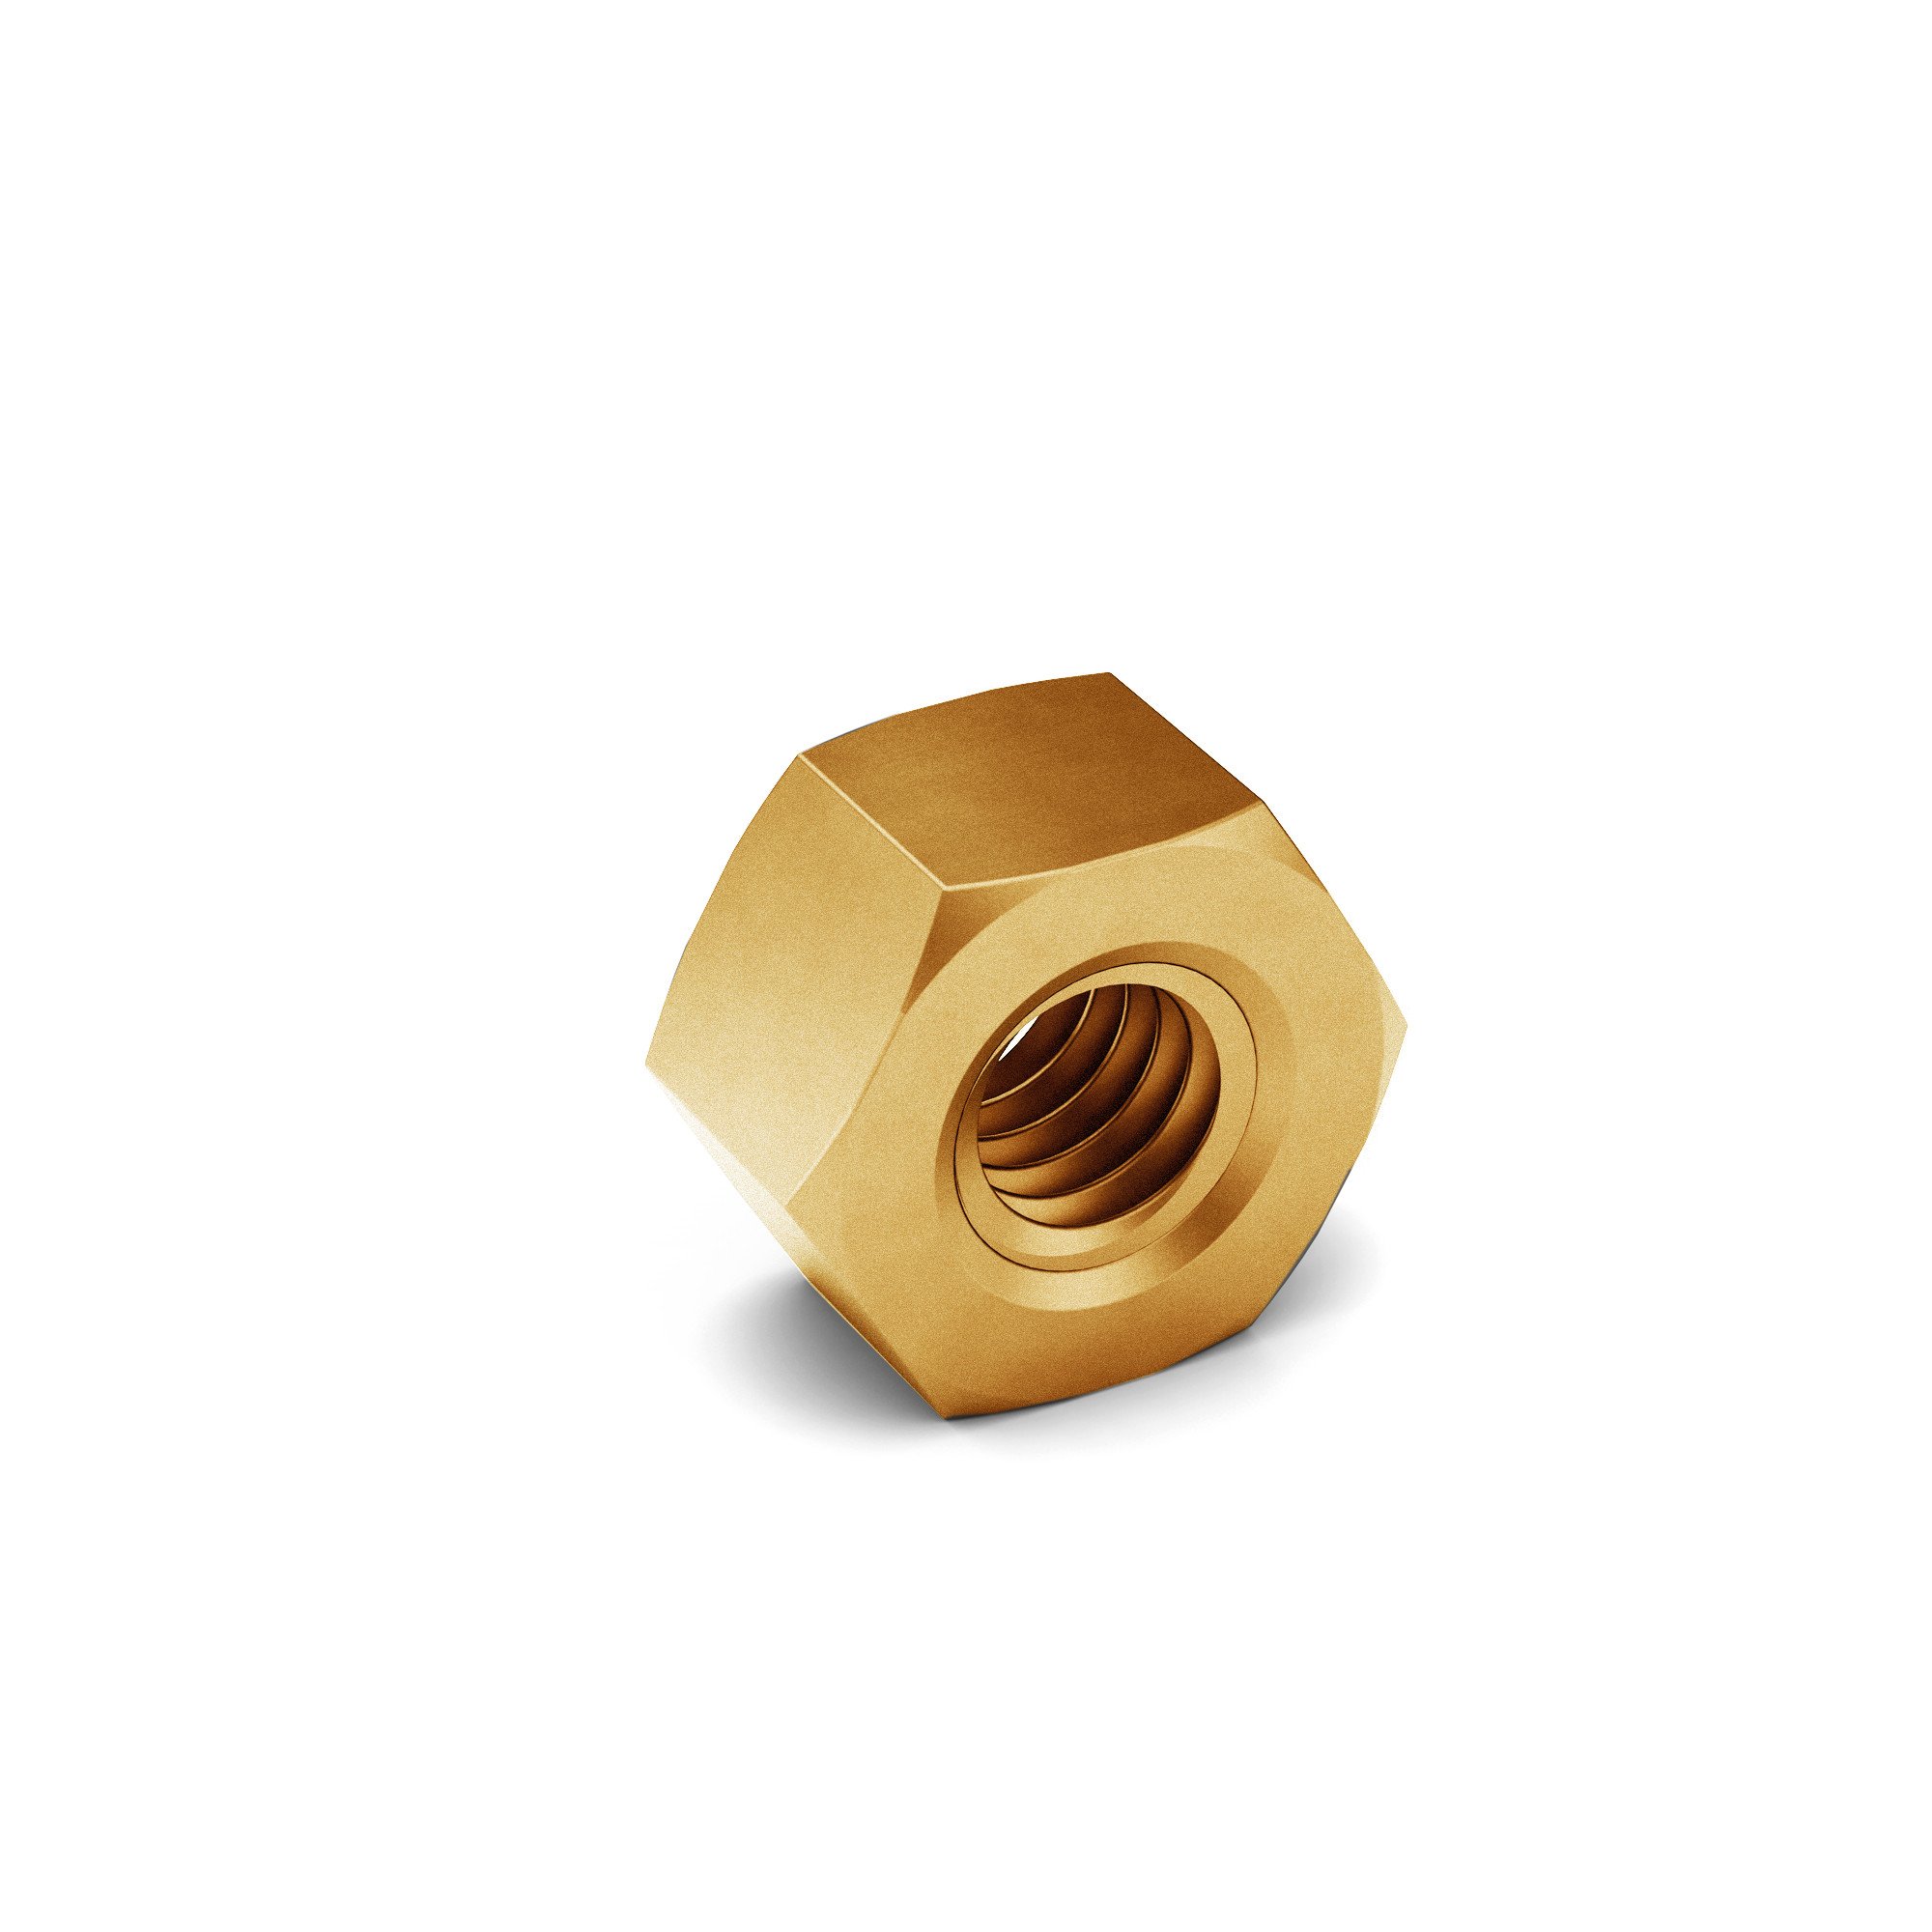 3/4-10 J995 GR 8 Hex Nut Zinc Yellow Made in USA